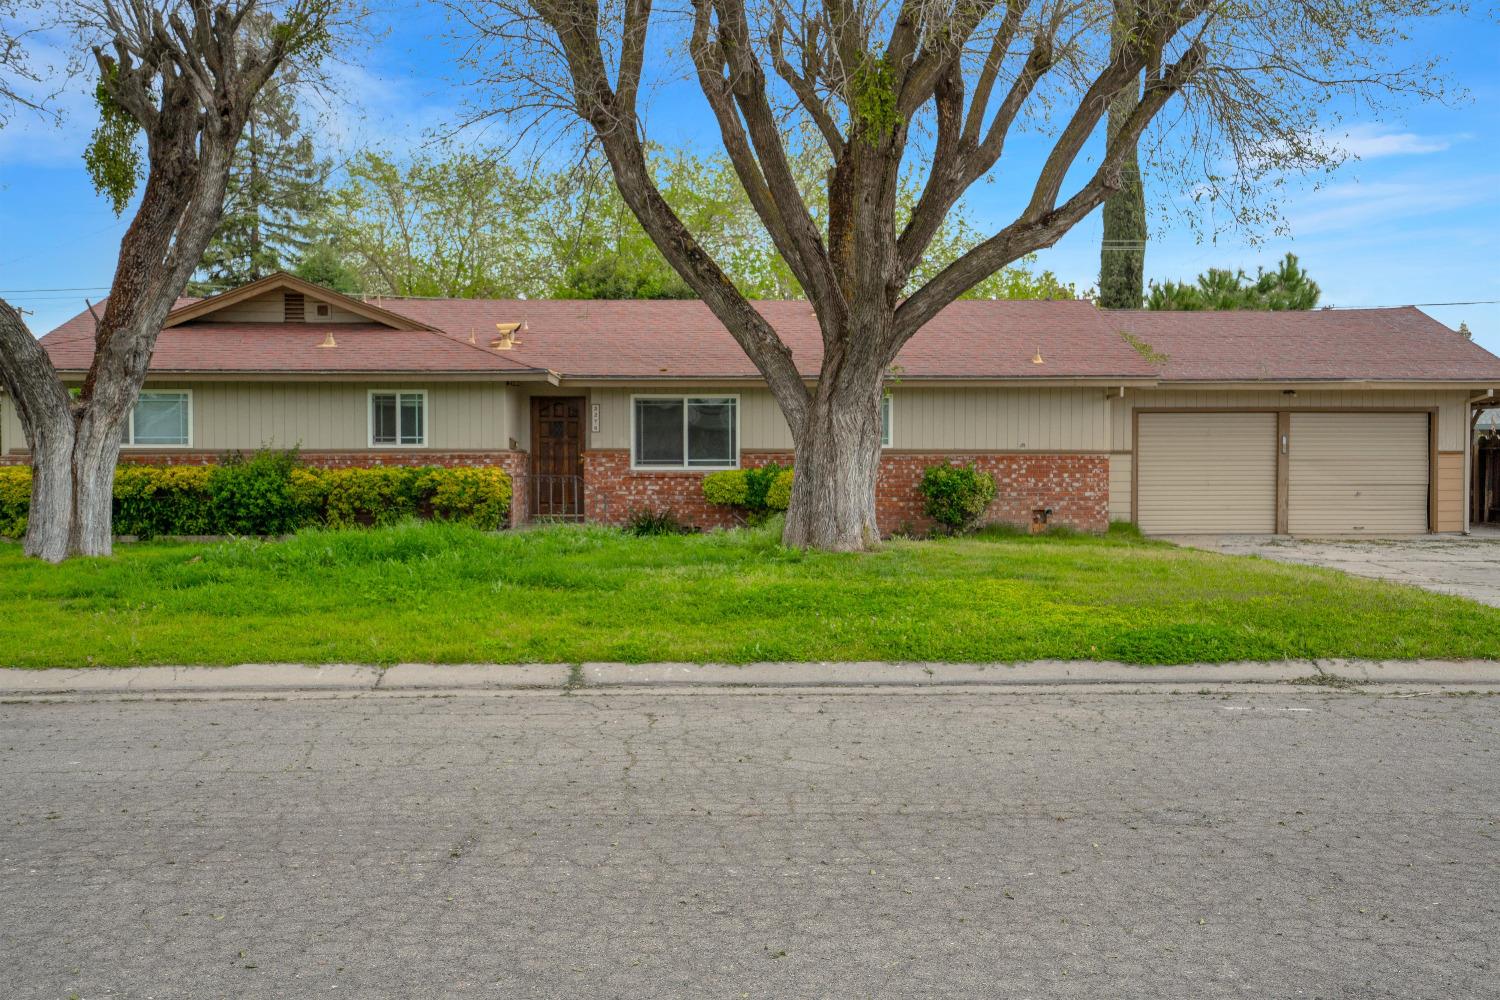 Photo of 3278 Laura Ave in Merced, CA